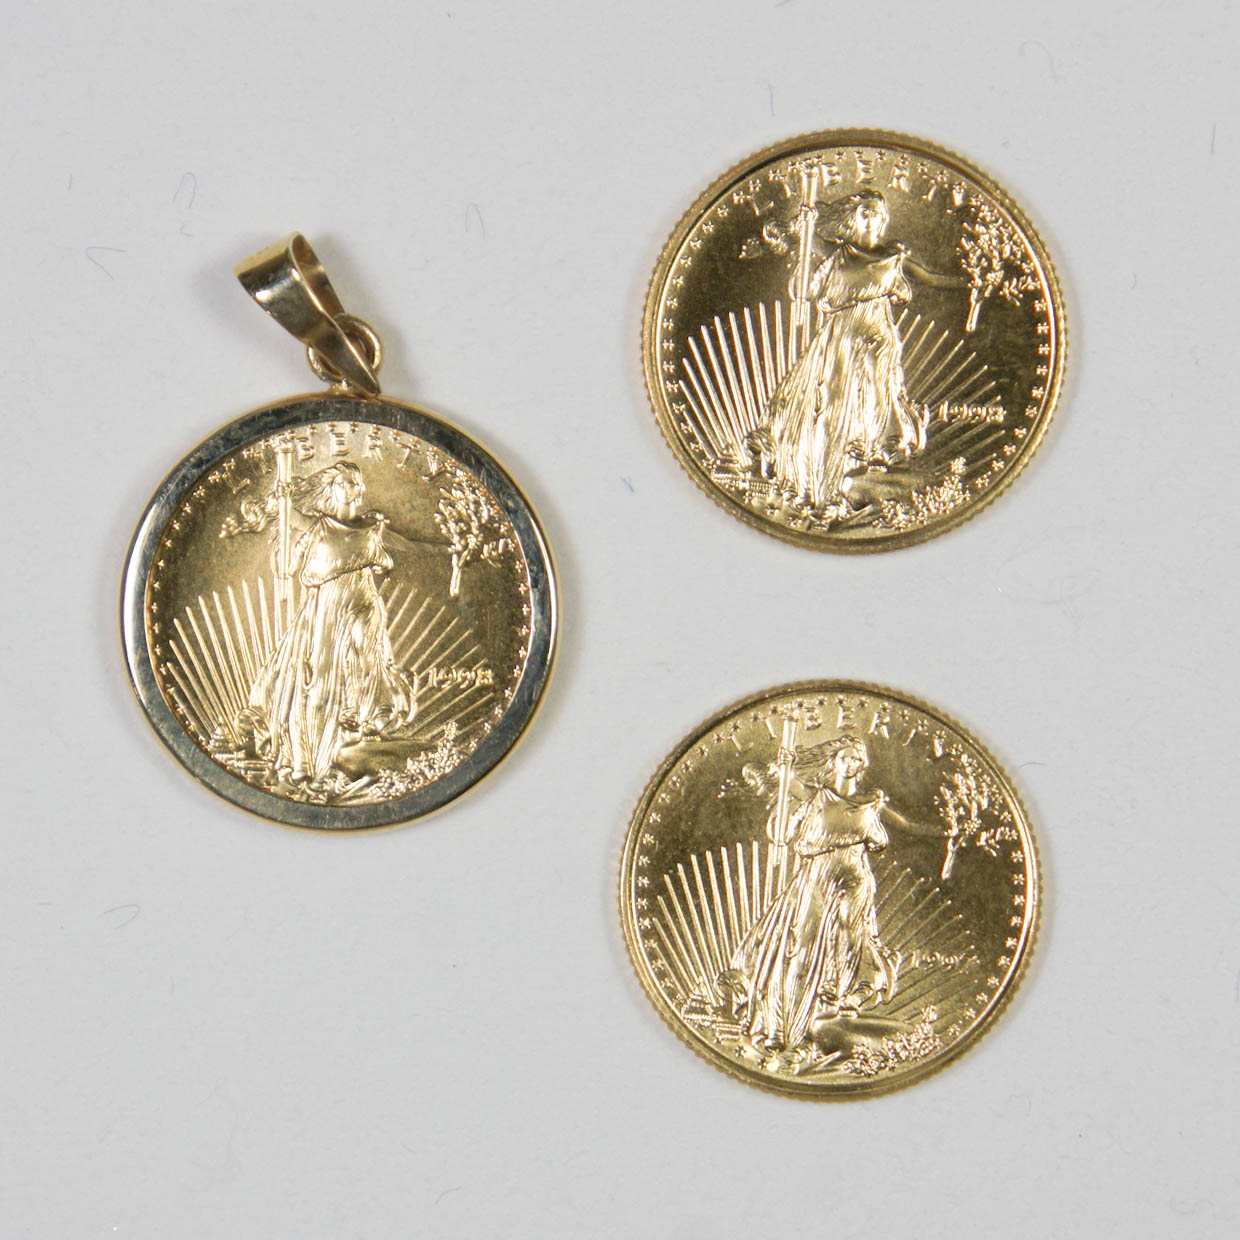 Three American Eagle Gold Coins 1/10 Ounce .999